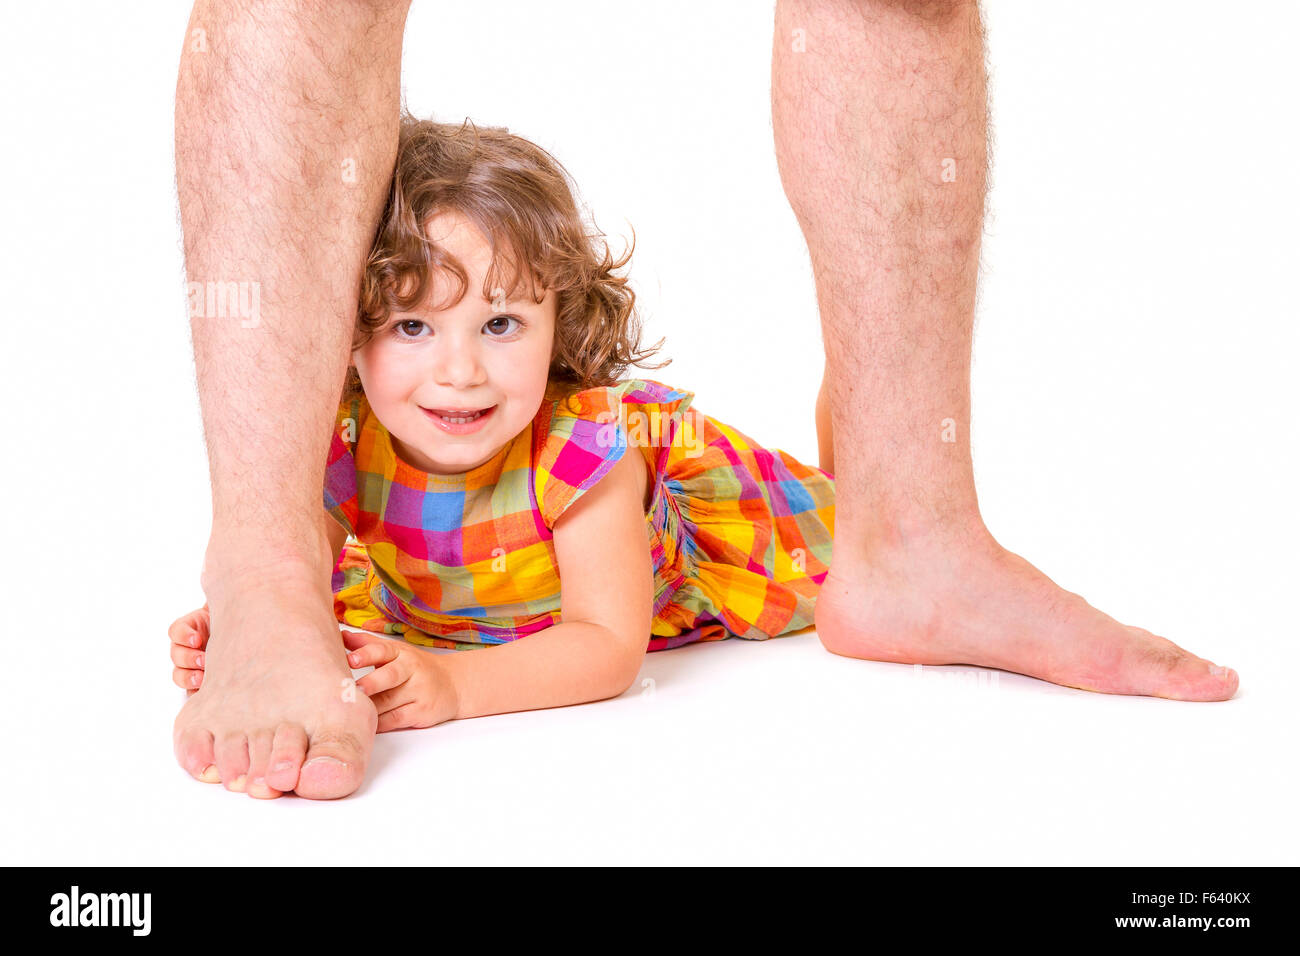 Little daughter feeling happy and protected at the feet of her father Stock Photo